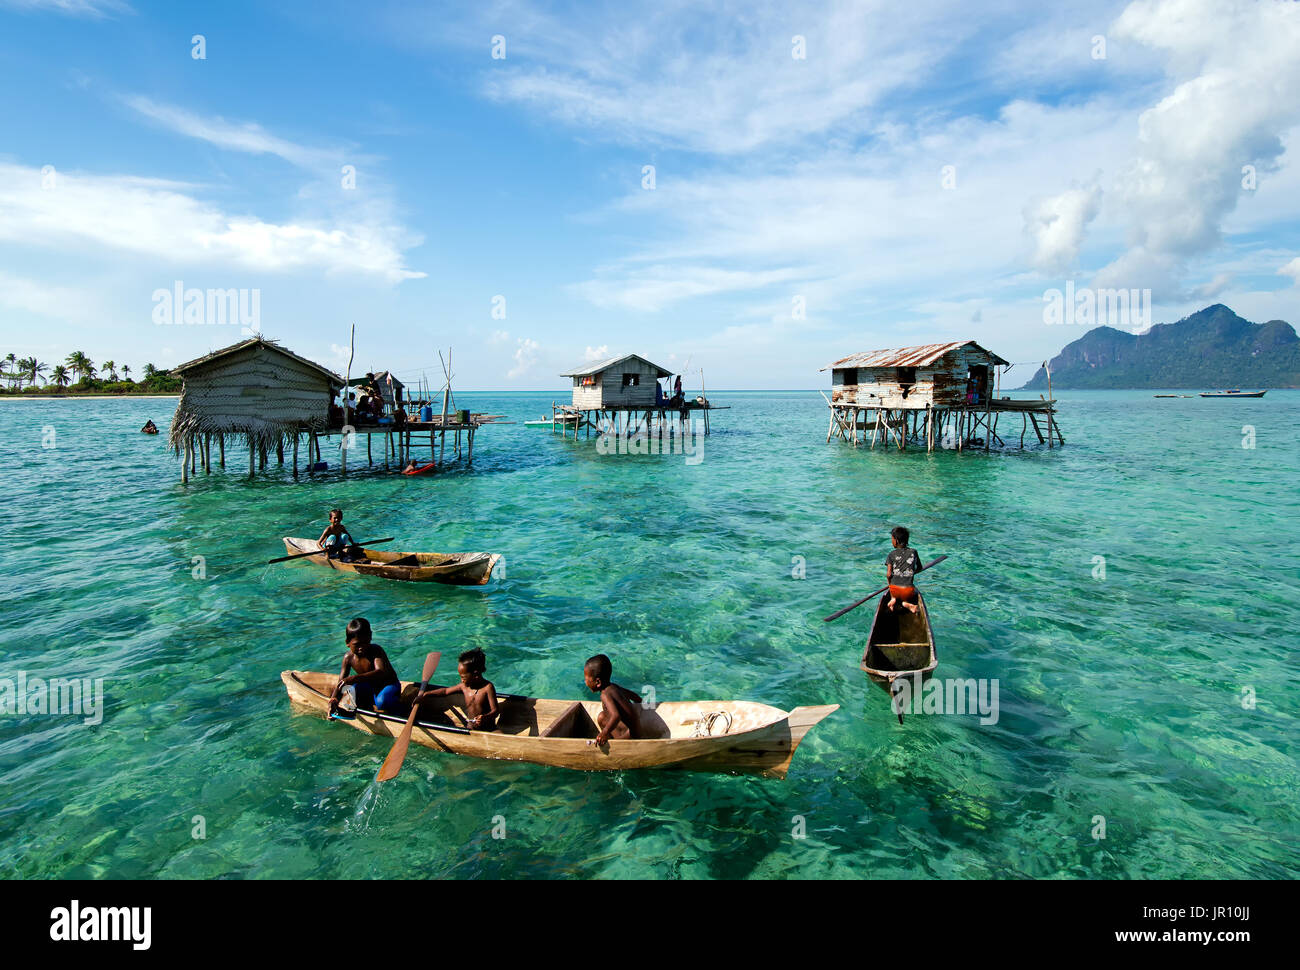 Semporna, Malaysia - 18 April, 2015: Young Bajau laut boy paddling a boat near stilted houses off the coast of Borneo in The Celebes Sea in the vicini Stock Photo